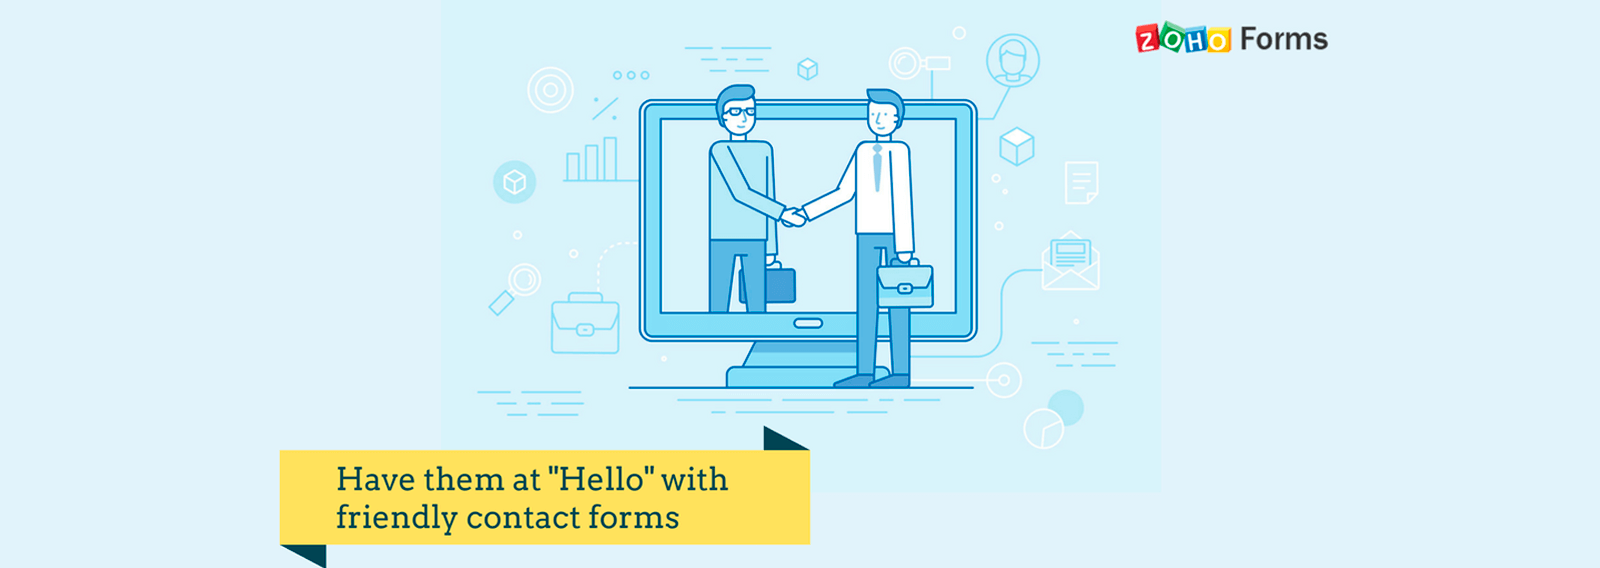 Online Forms 101: Creating contact forms that mean business